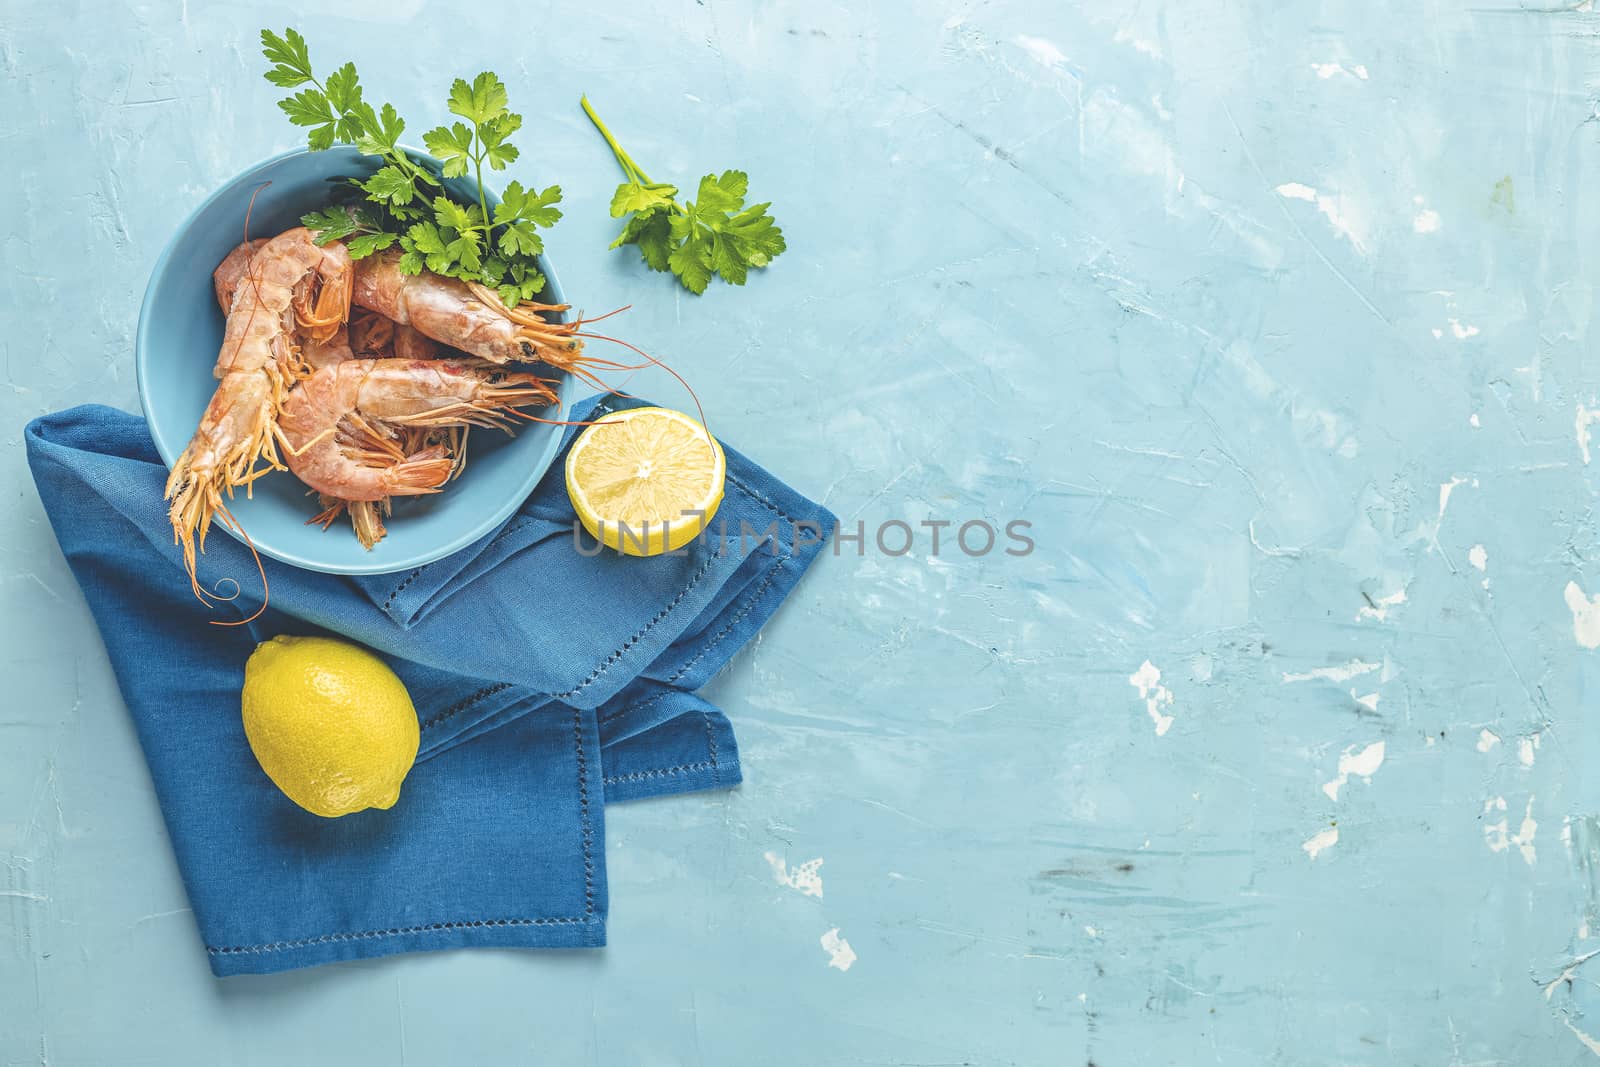 Shrimp, prawn with parsley in blue ceramic plate surrounded napk by ArtSvitlyna